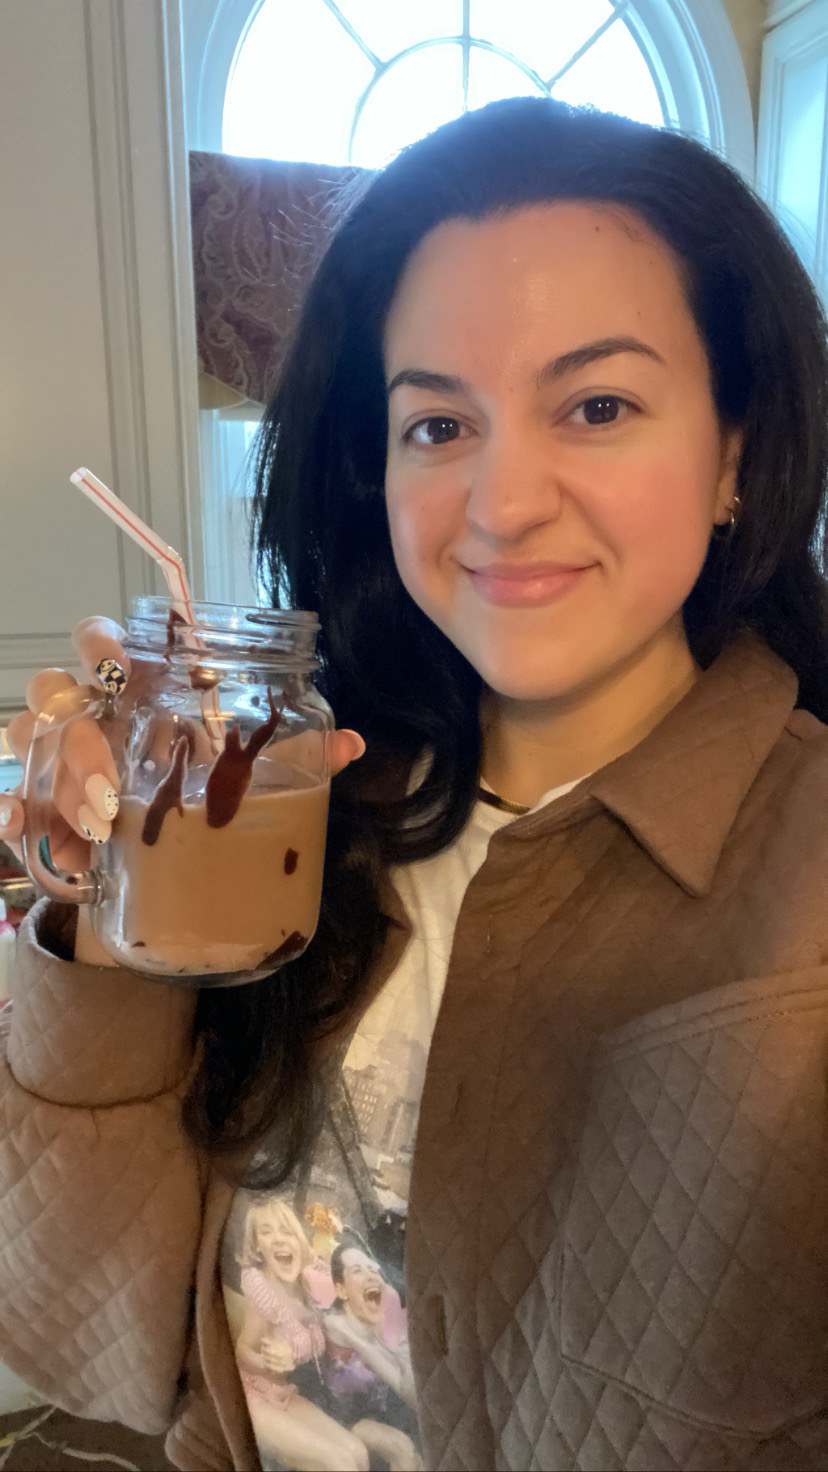 The author taking a selfie holding up a glass filled with a chocolate protein coffee drink